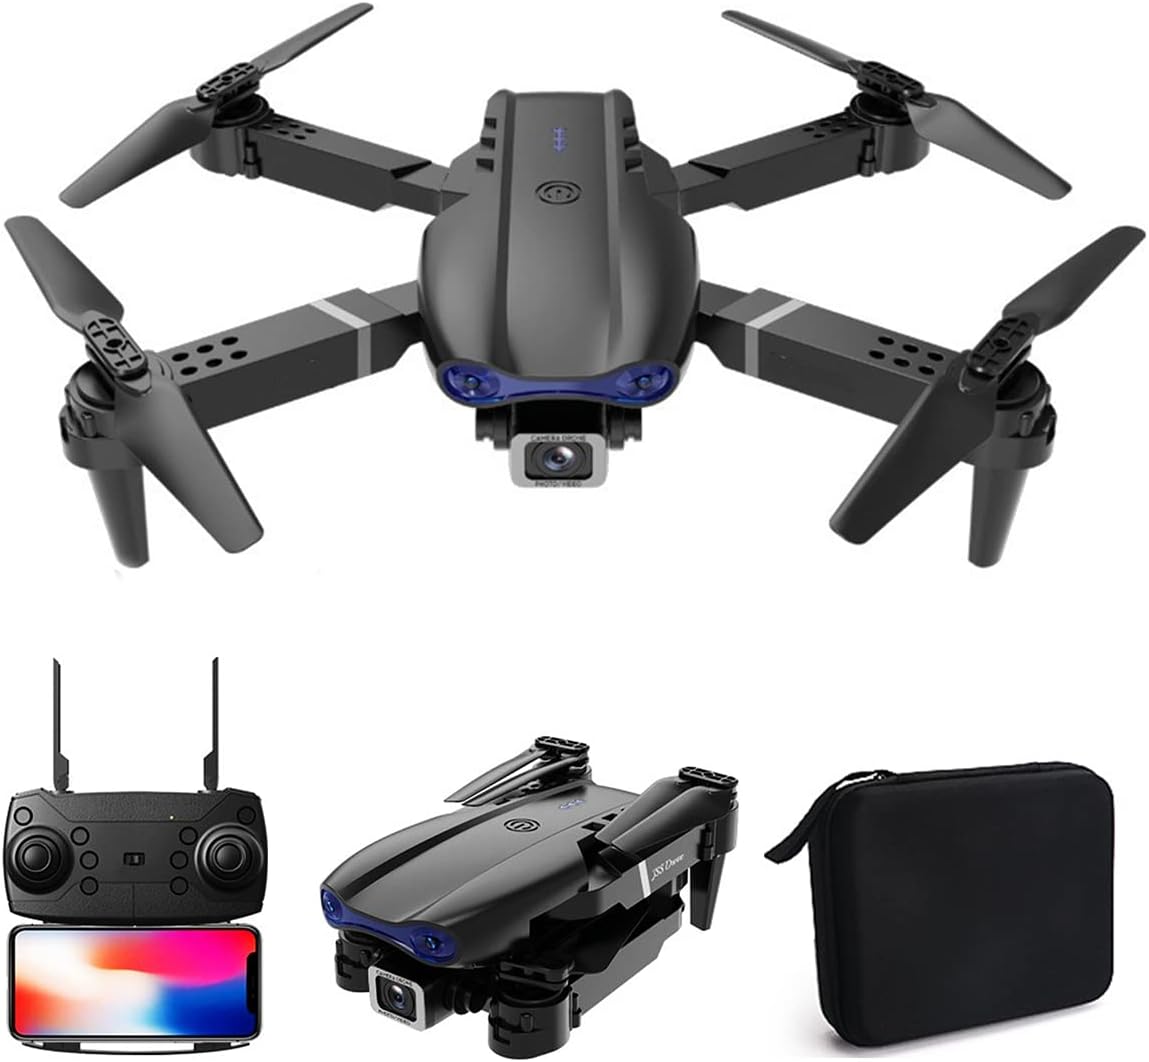 Drone with 1080P Dual HD Camera – 2023 Upgradded RC Quadcopter for Adults and Kids, WiFi FPV RC Drone for Beginners Live Video HD Wide Angle RC Aircraft, Trajectory Flight, Auto Hover, 2 Batteries ,Carrying Case.